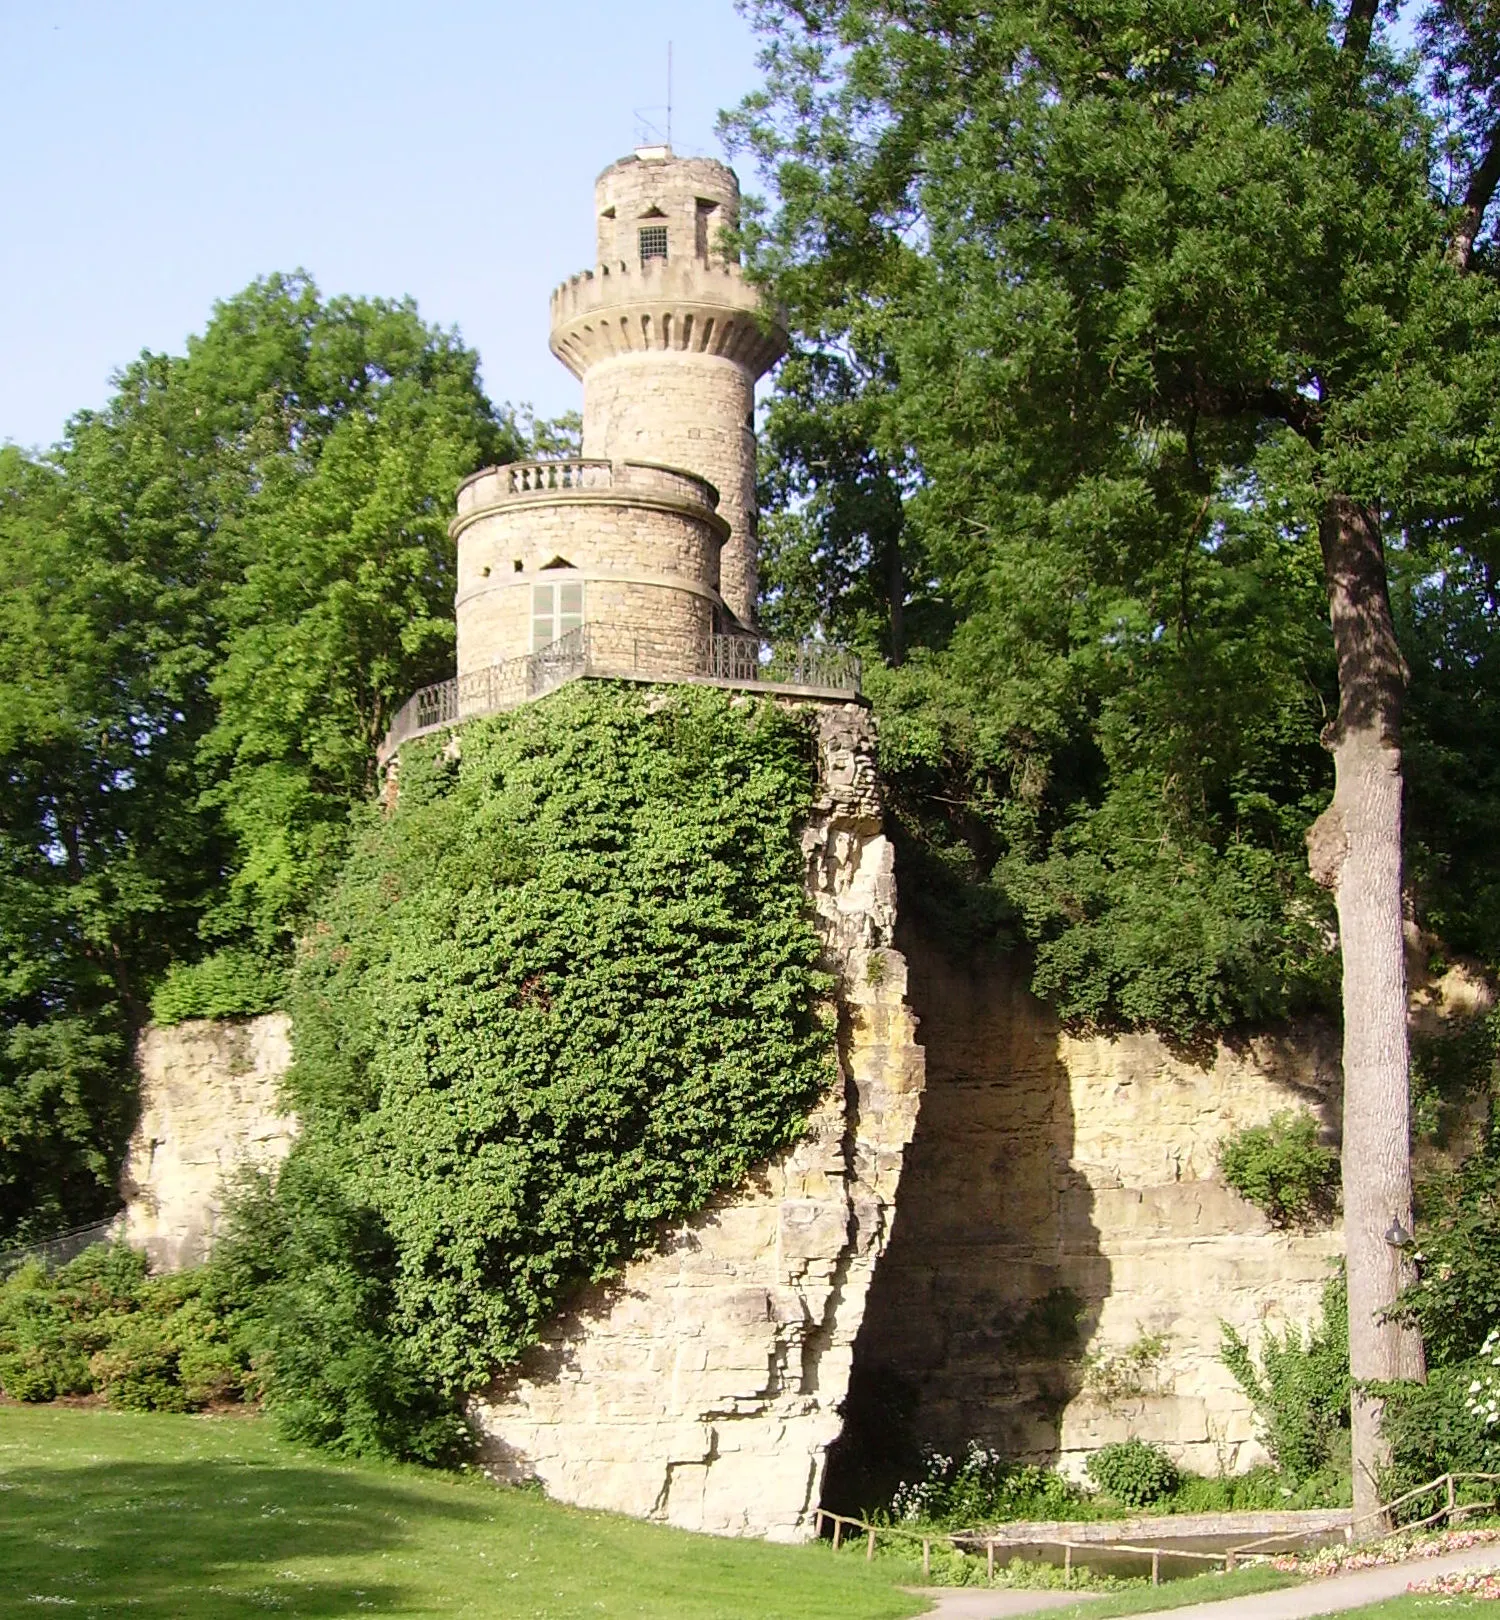 Photo showing: Emichsburg (castle), in the Garden at Schloss Ludwigsburg — in Ludwigsburg, Germany.